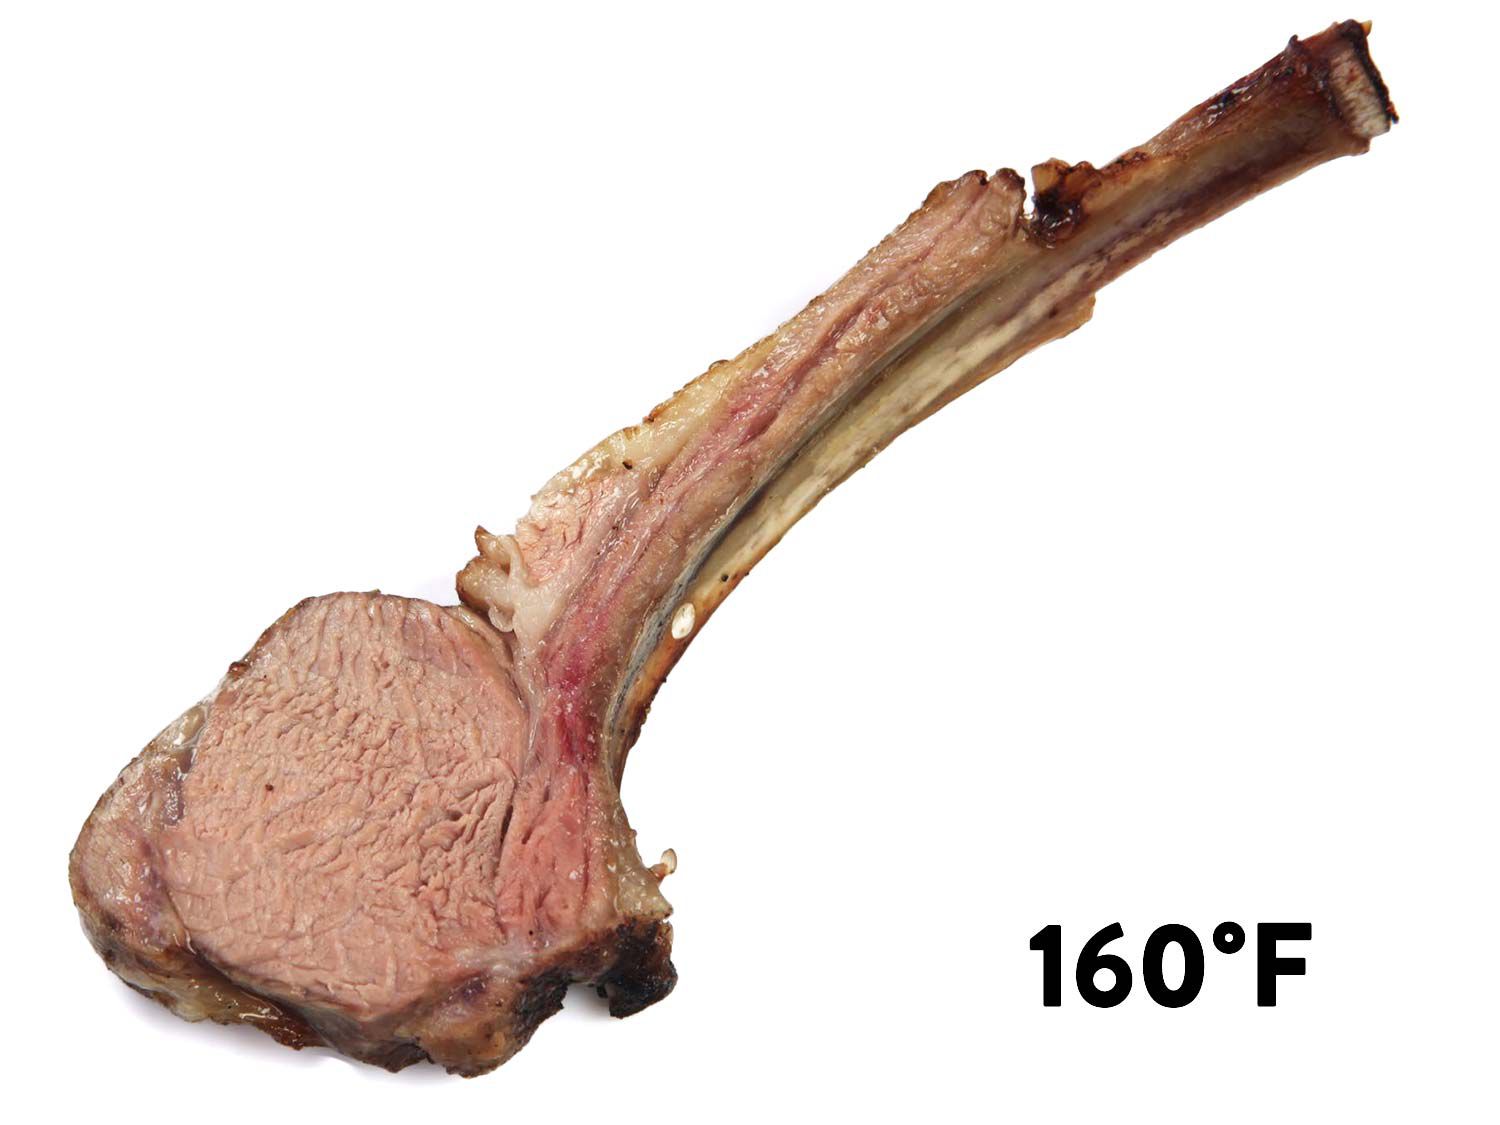 Can You Eat Lamb Medium Rare: Doneness Guidelines for Lamb